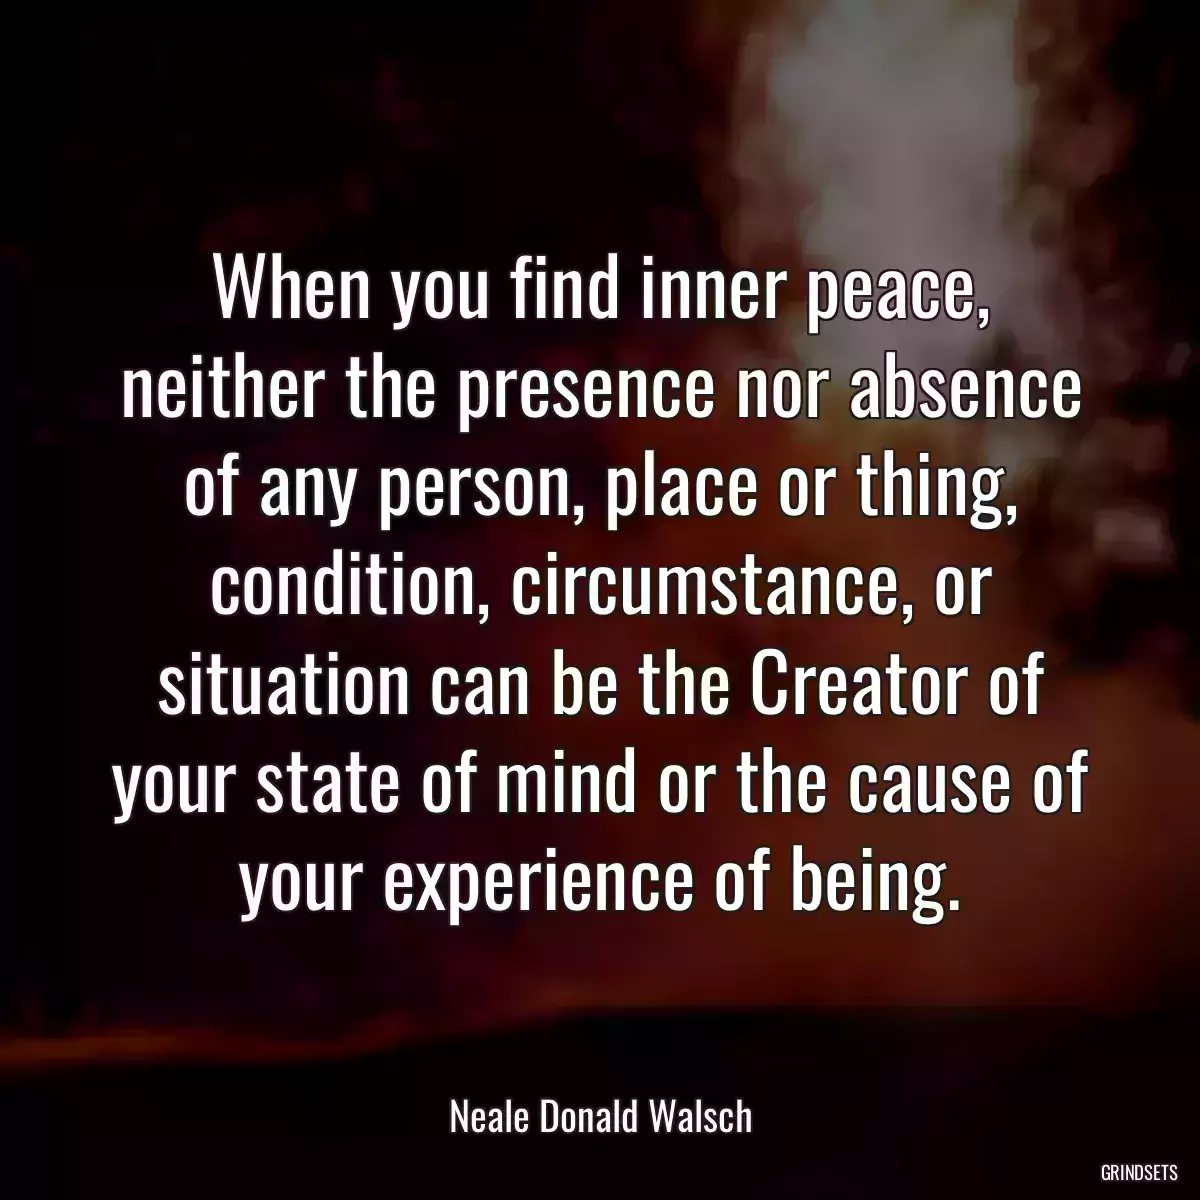 When you find inner peace, neither the presence nor absence of any person, place or thing, condition, circumstance, or situation can be the Creator of your state of mind or the cause of your experience of being.